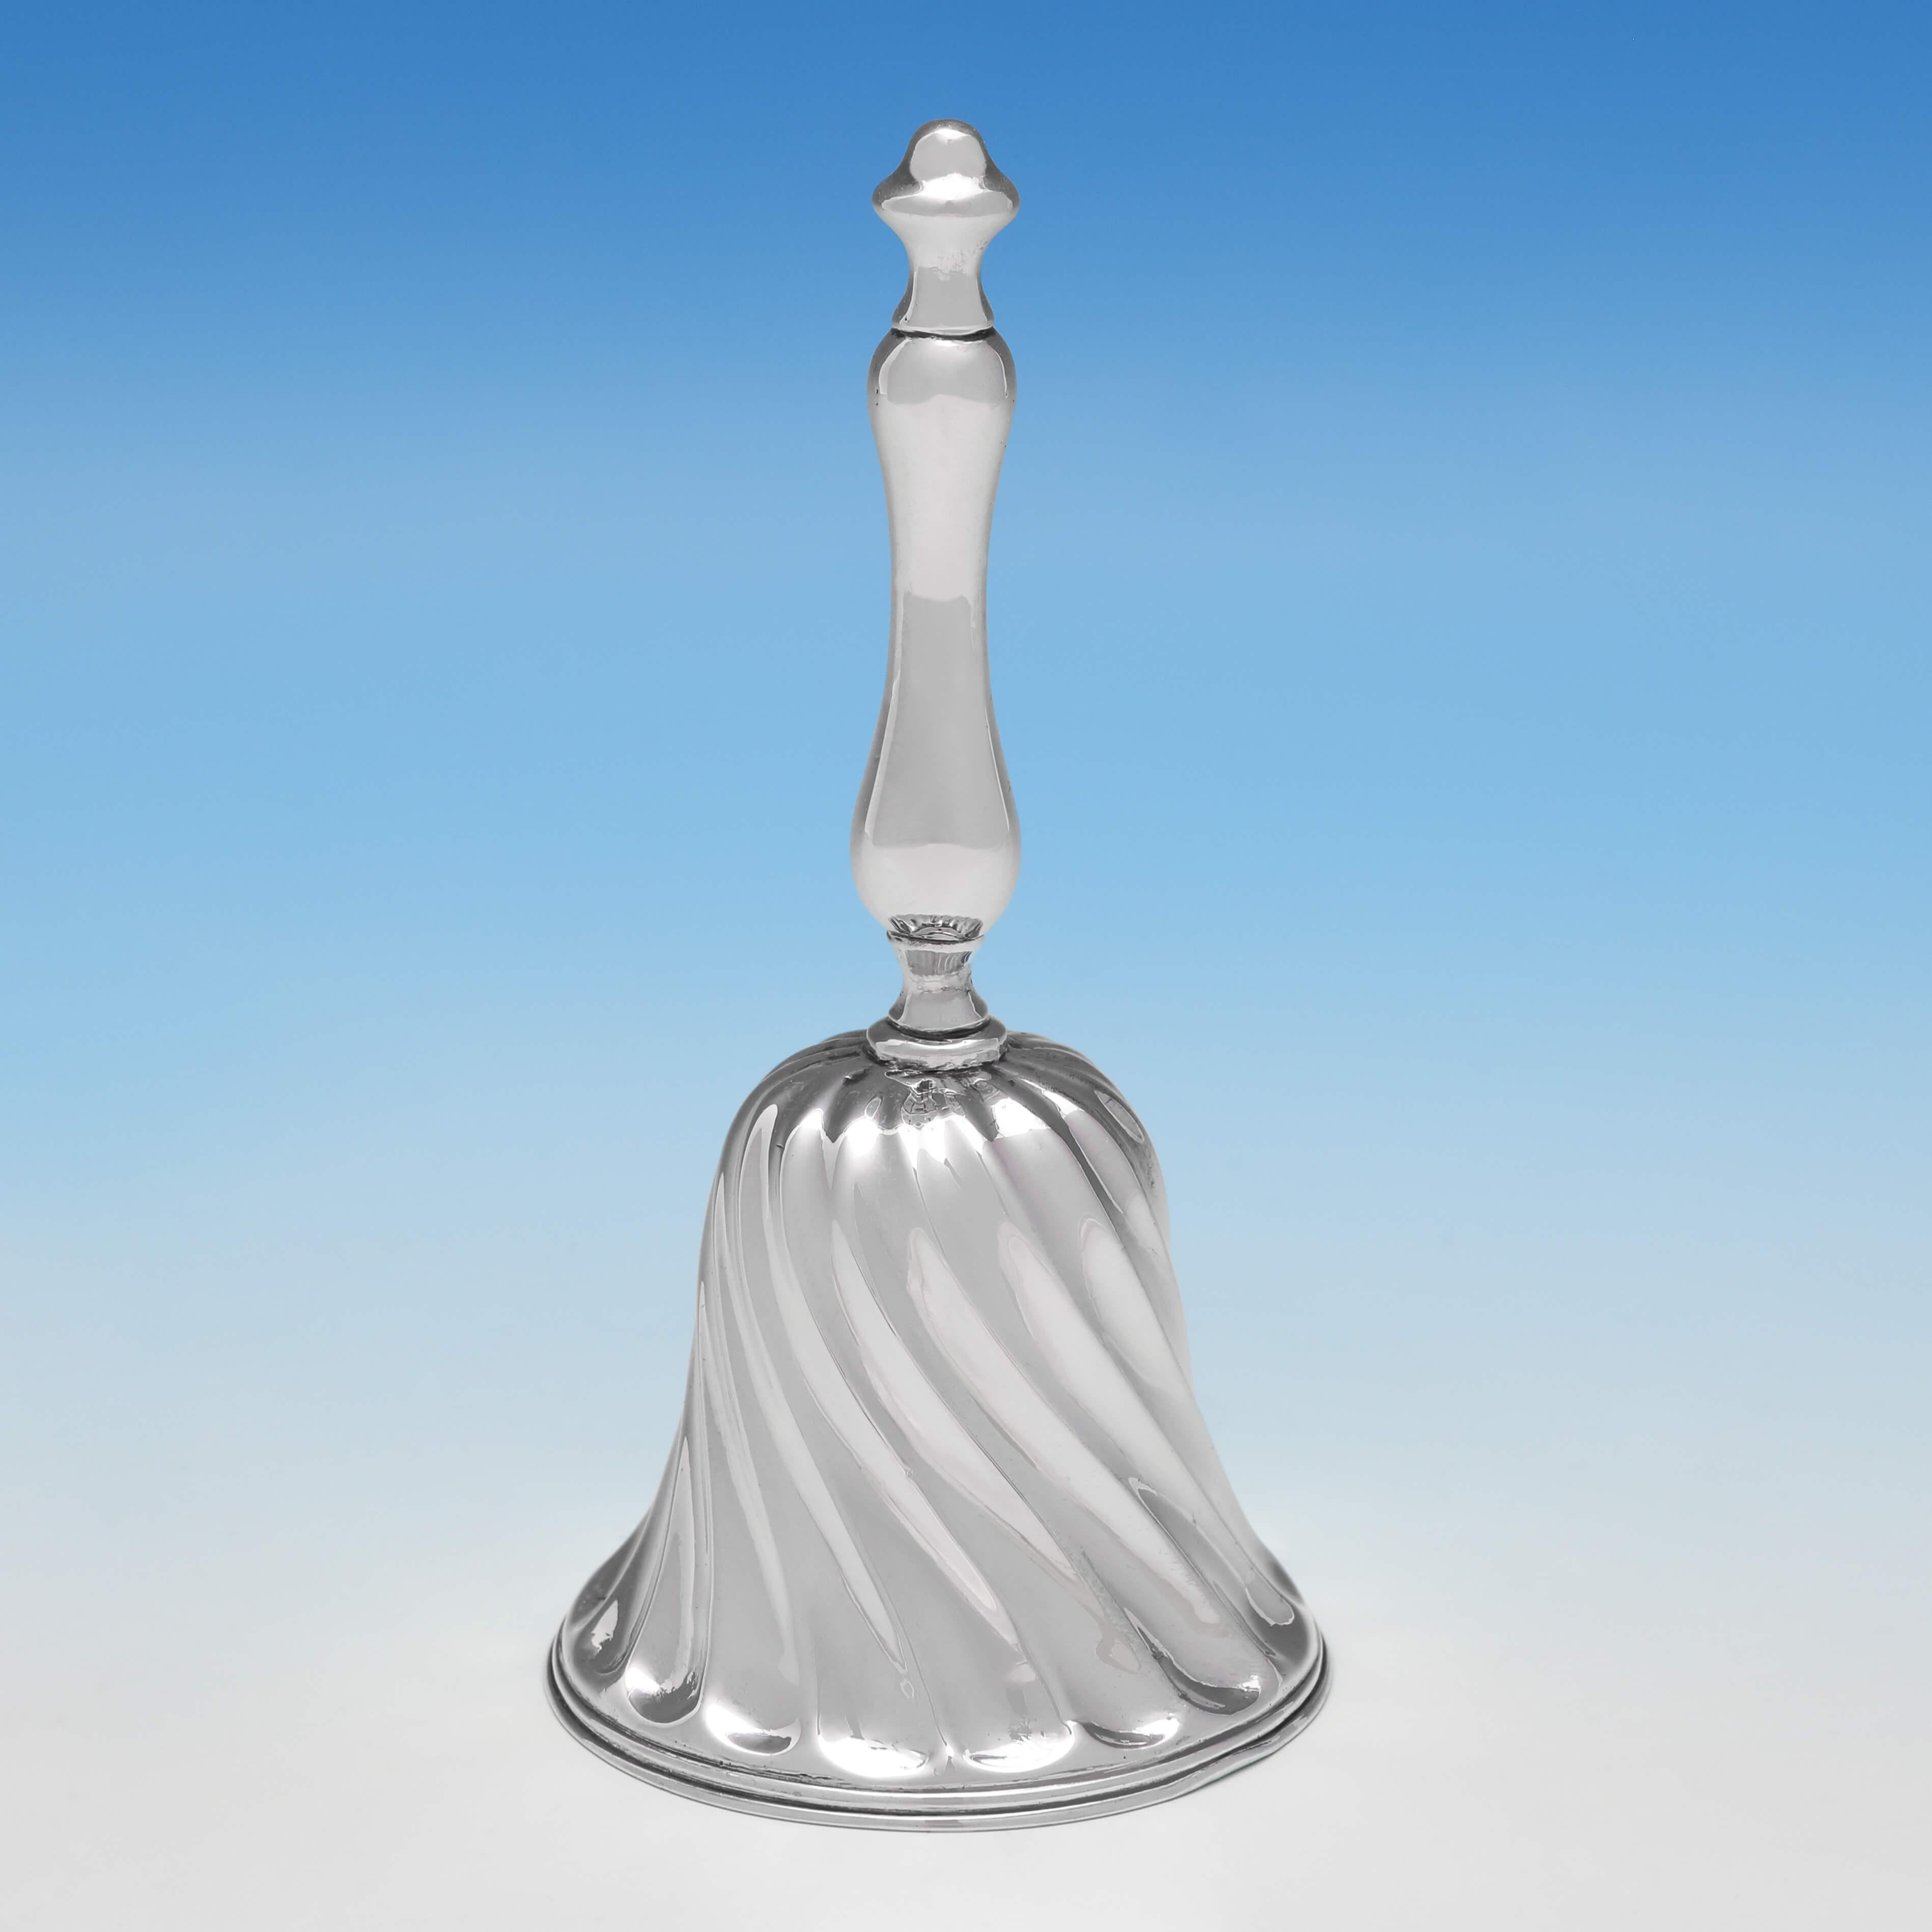 Hallmarked in London in 1900 by Harry Brasted, this attractive, Victorian, antique sterling silver bell, features swirled sunken fluting, and a reed border. The bell measures 4.5